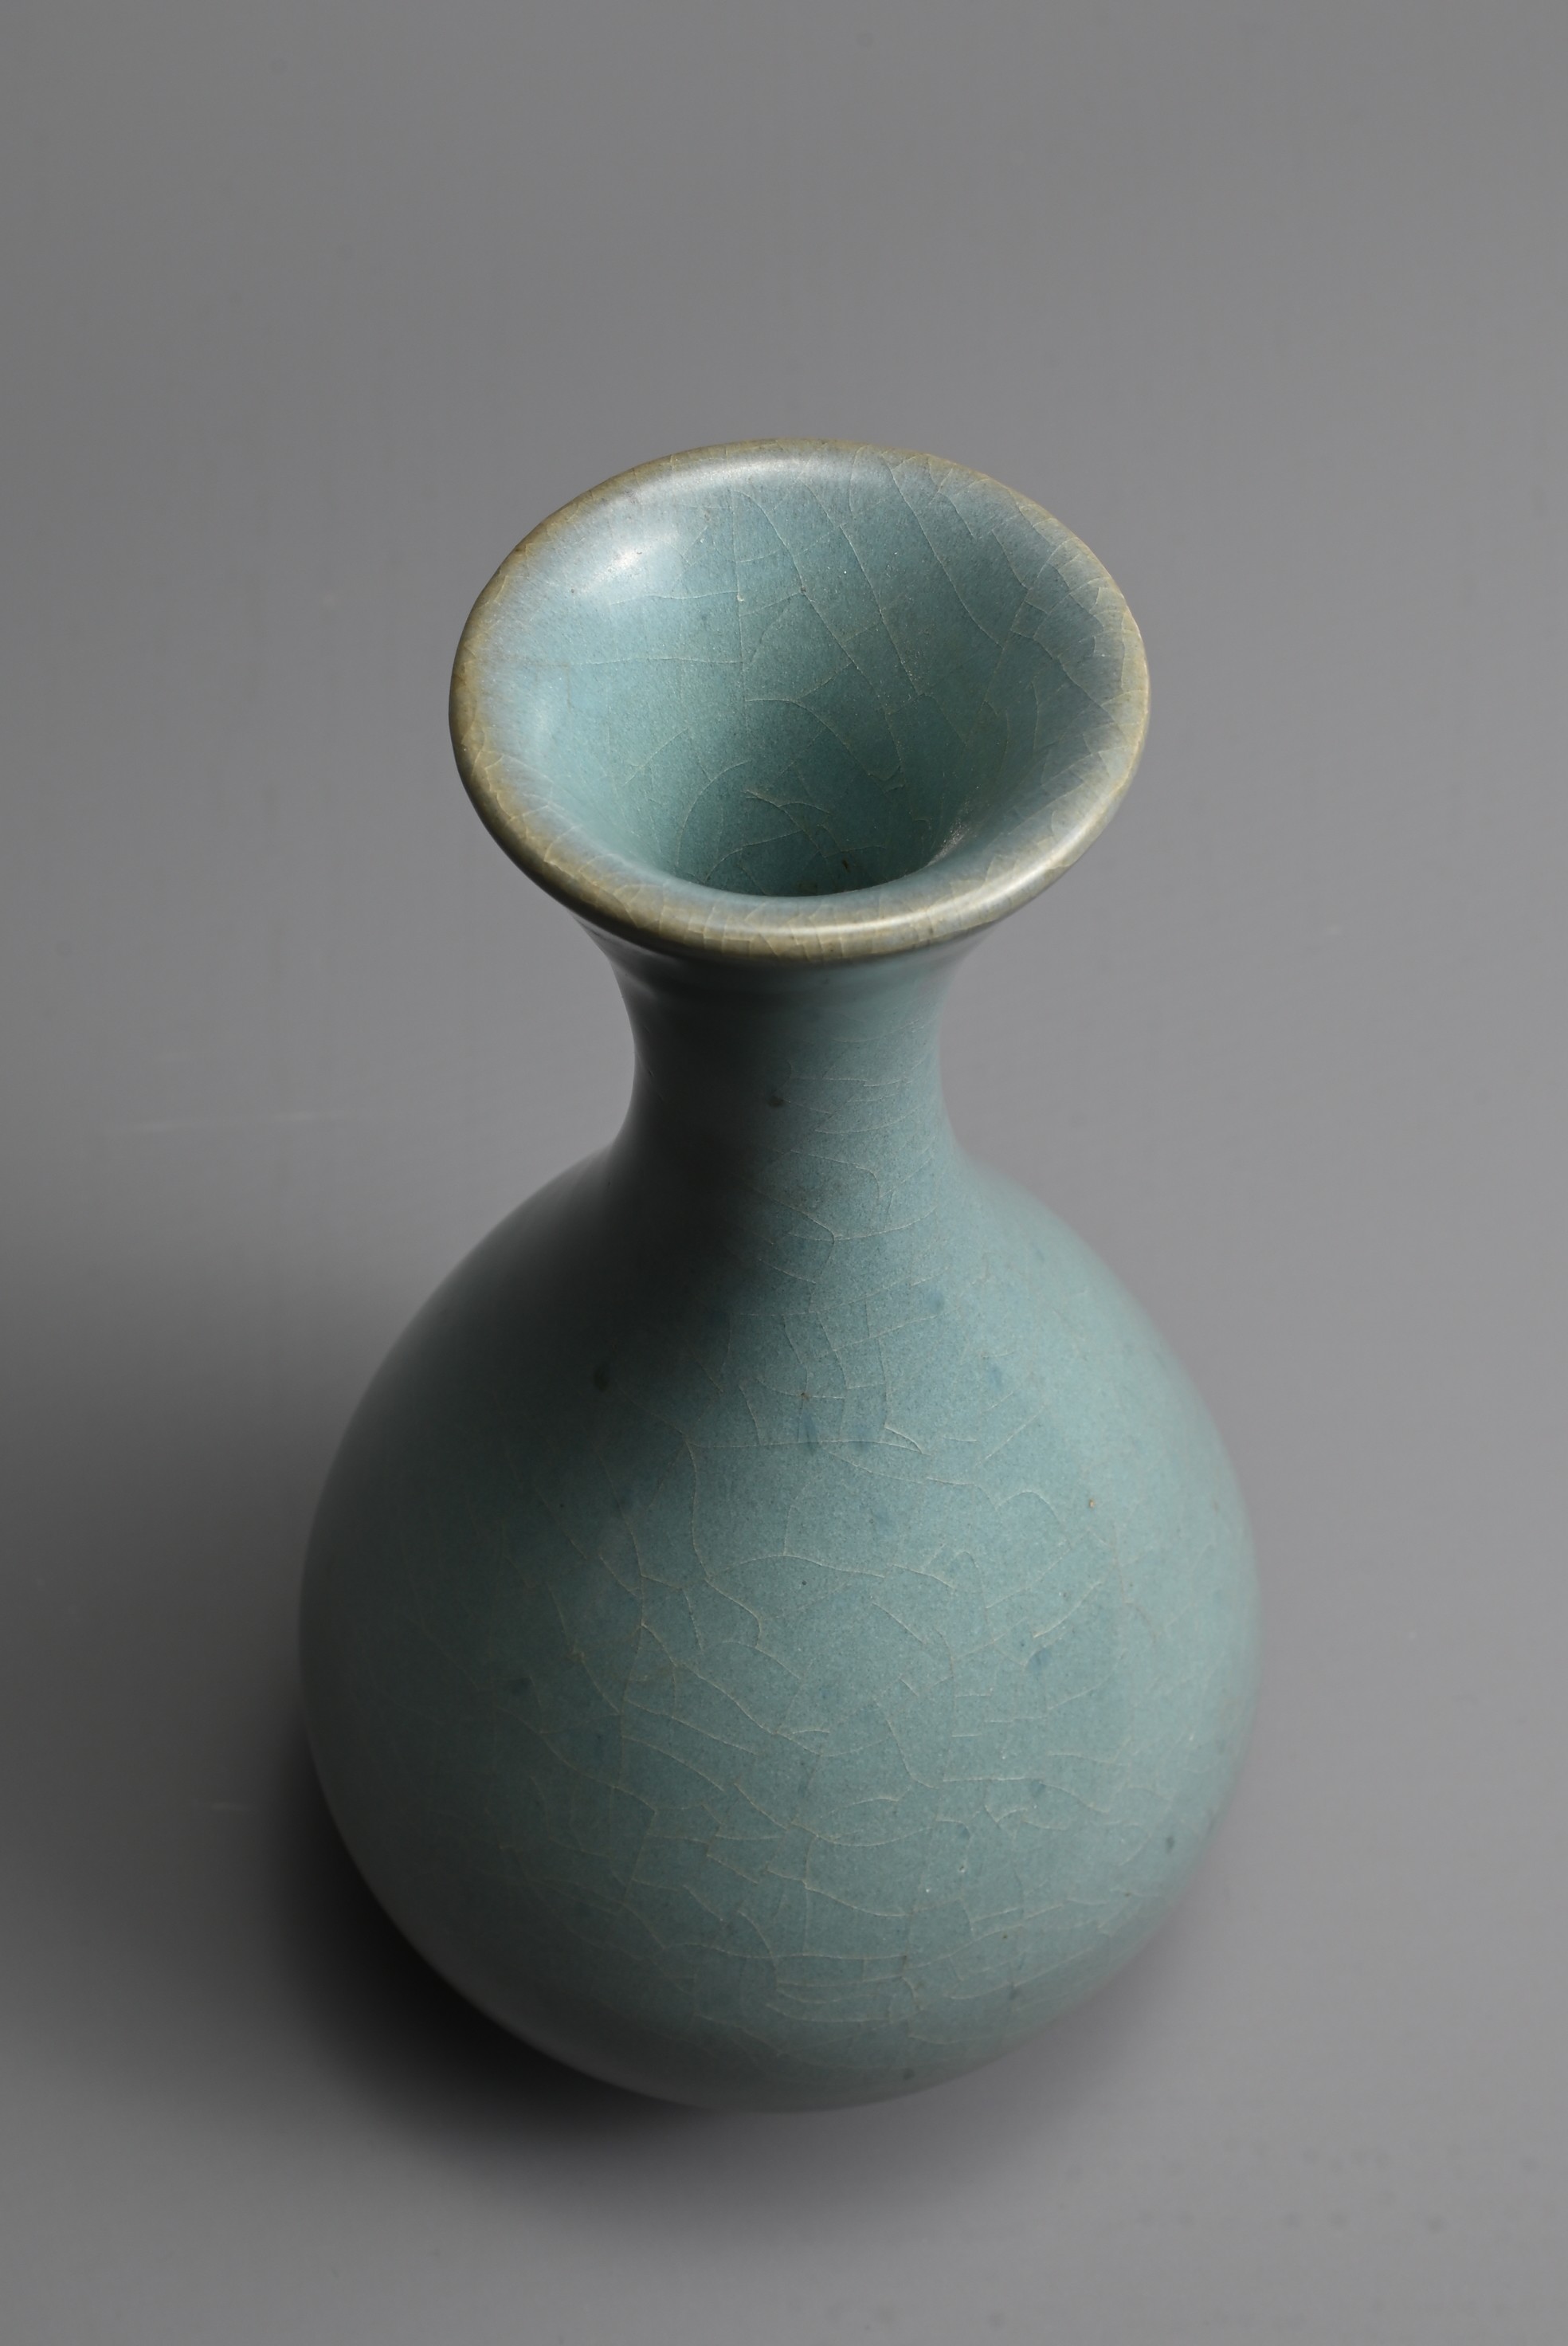 A CHINESE JUN TYPE BOTTLE VASE, SONG / YUAN DYNASTY. Pear shaped bottle with flared rim covered in a - Image 7 of 7